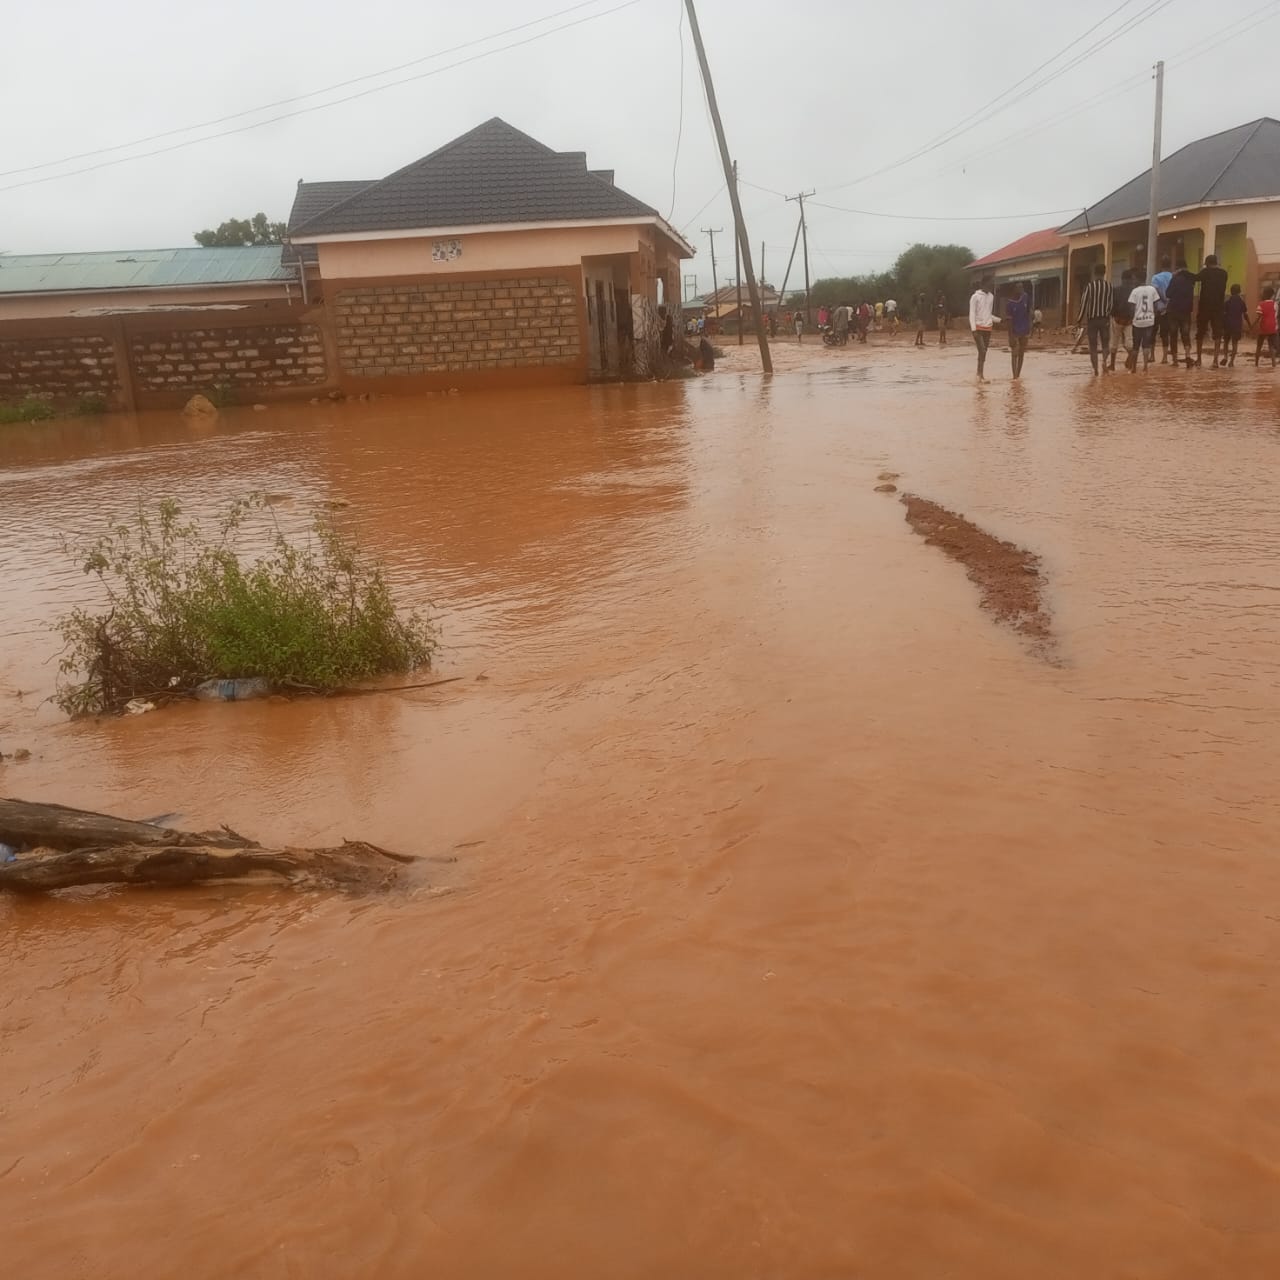 Seven-hour heavy downpour in Mandera leaves a trail of destruction